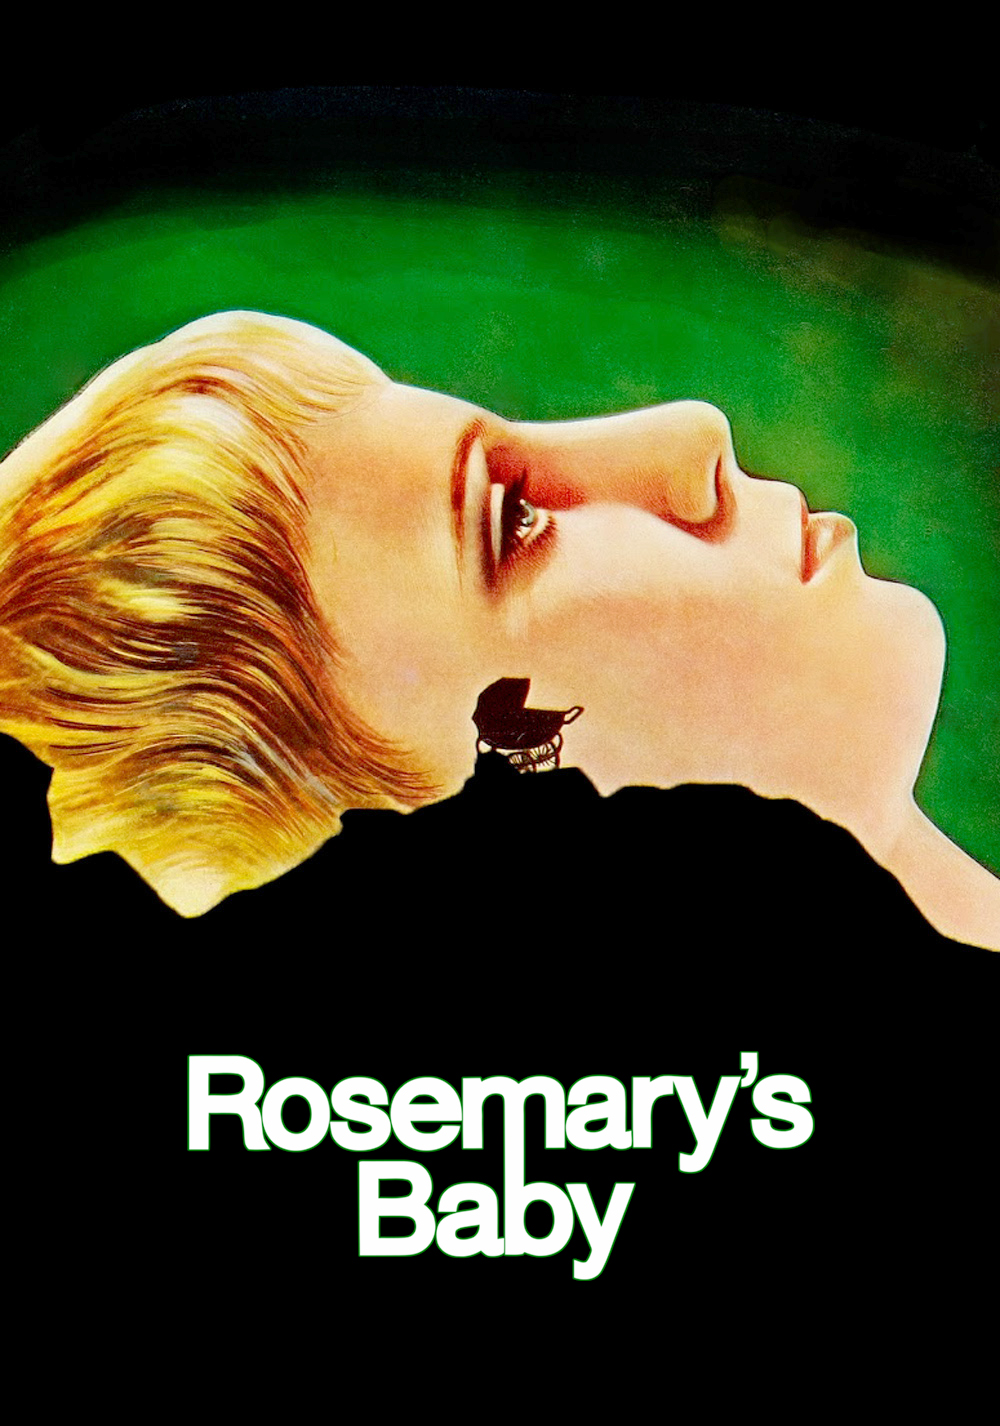 Rosemary's Baby Images. 